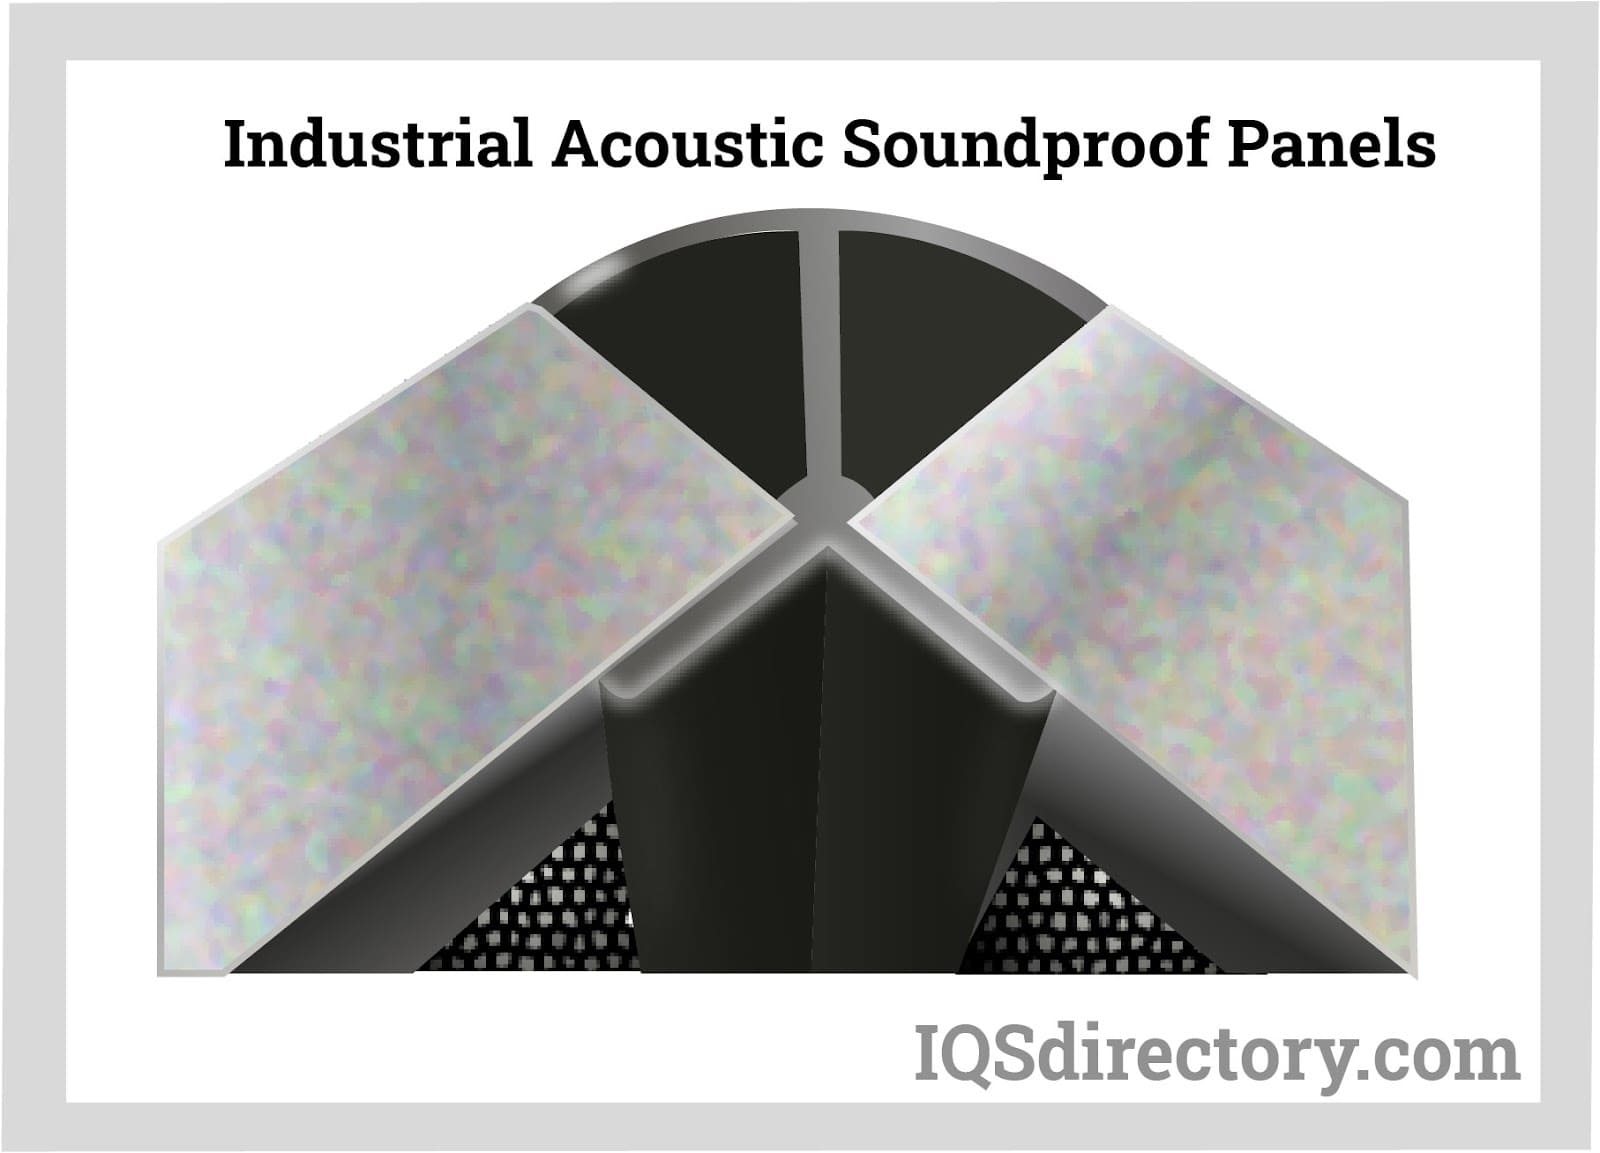 Industrial Acoustic Soundproof Panels